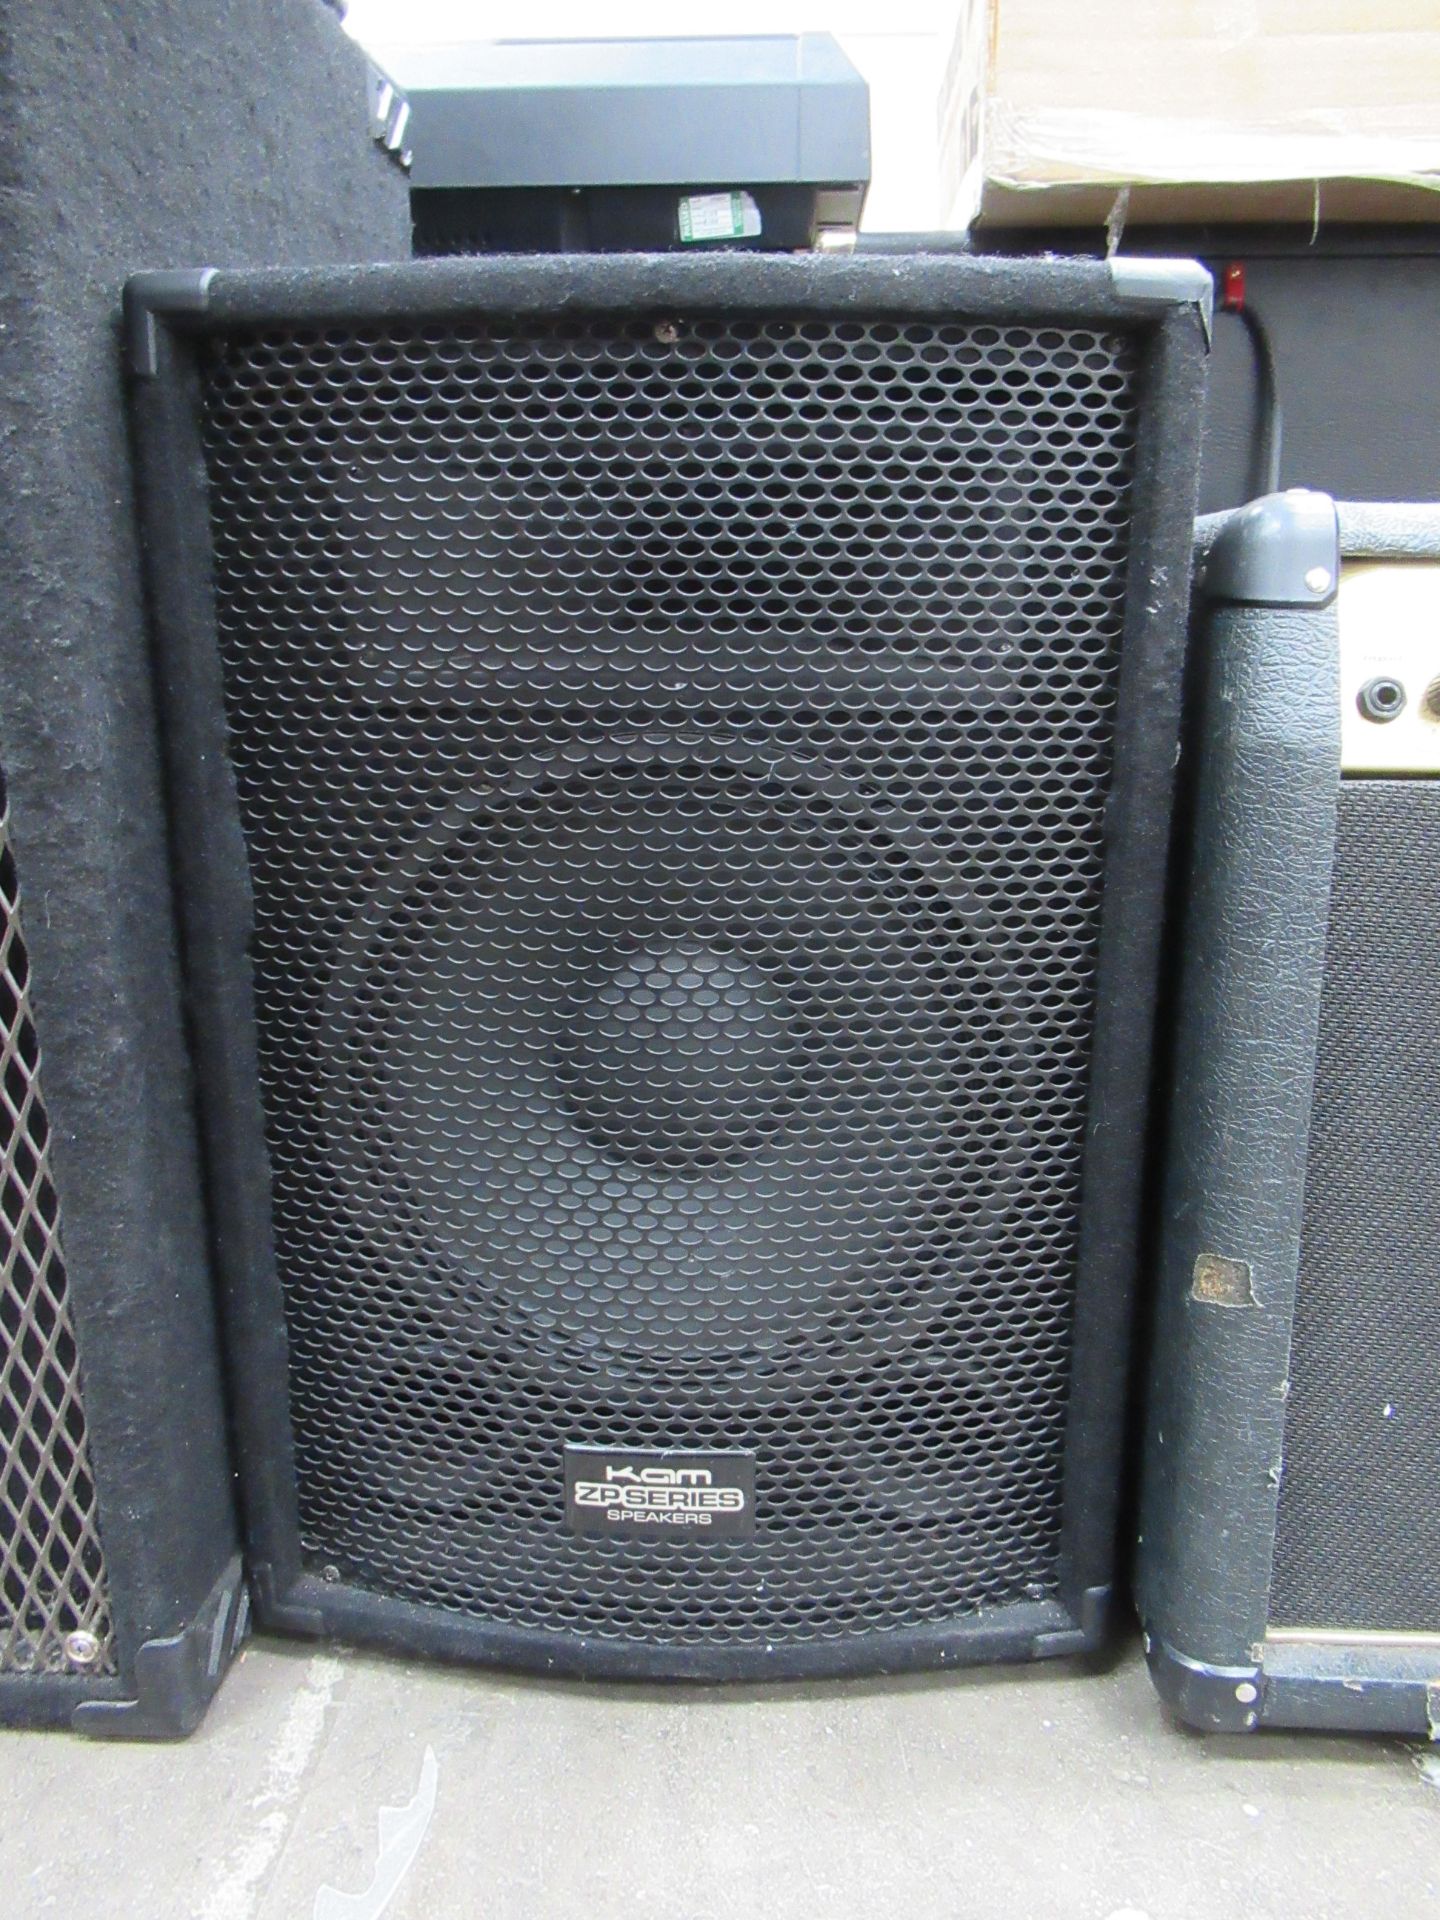 2x Speakers and a Marshall Pre-Amp - Image 3 of 6